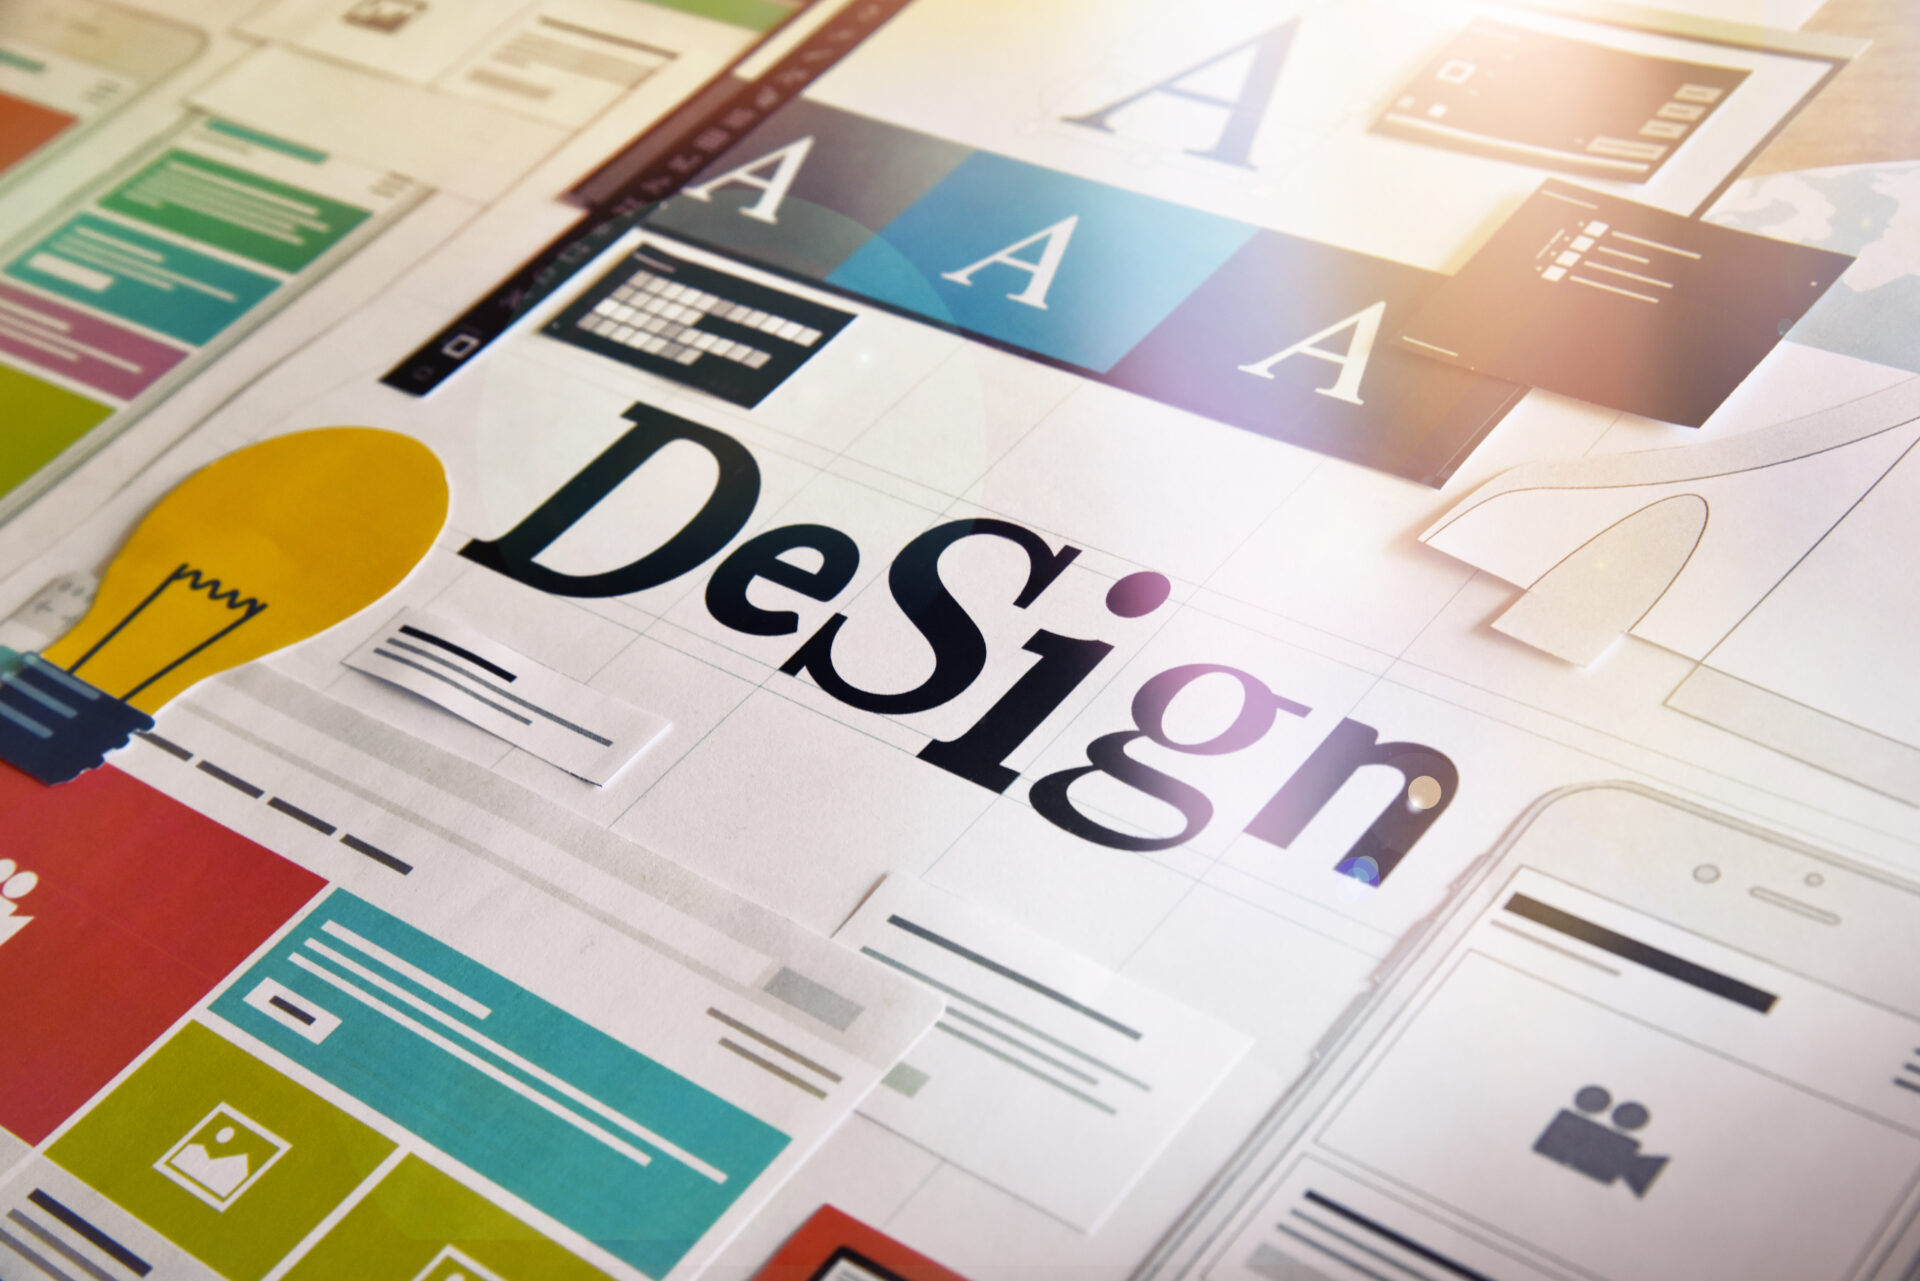 Design concept for different categories of design such as graphi